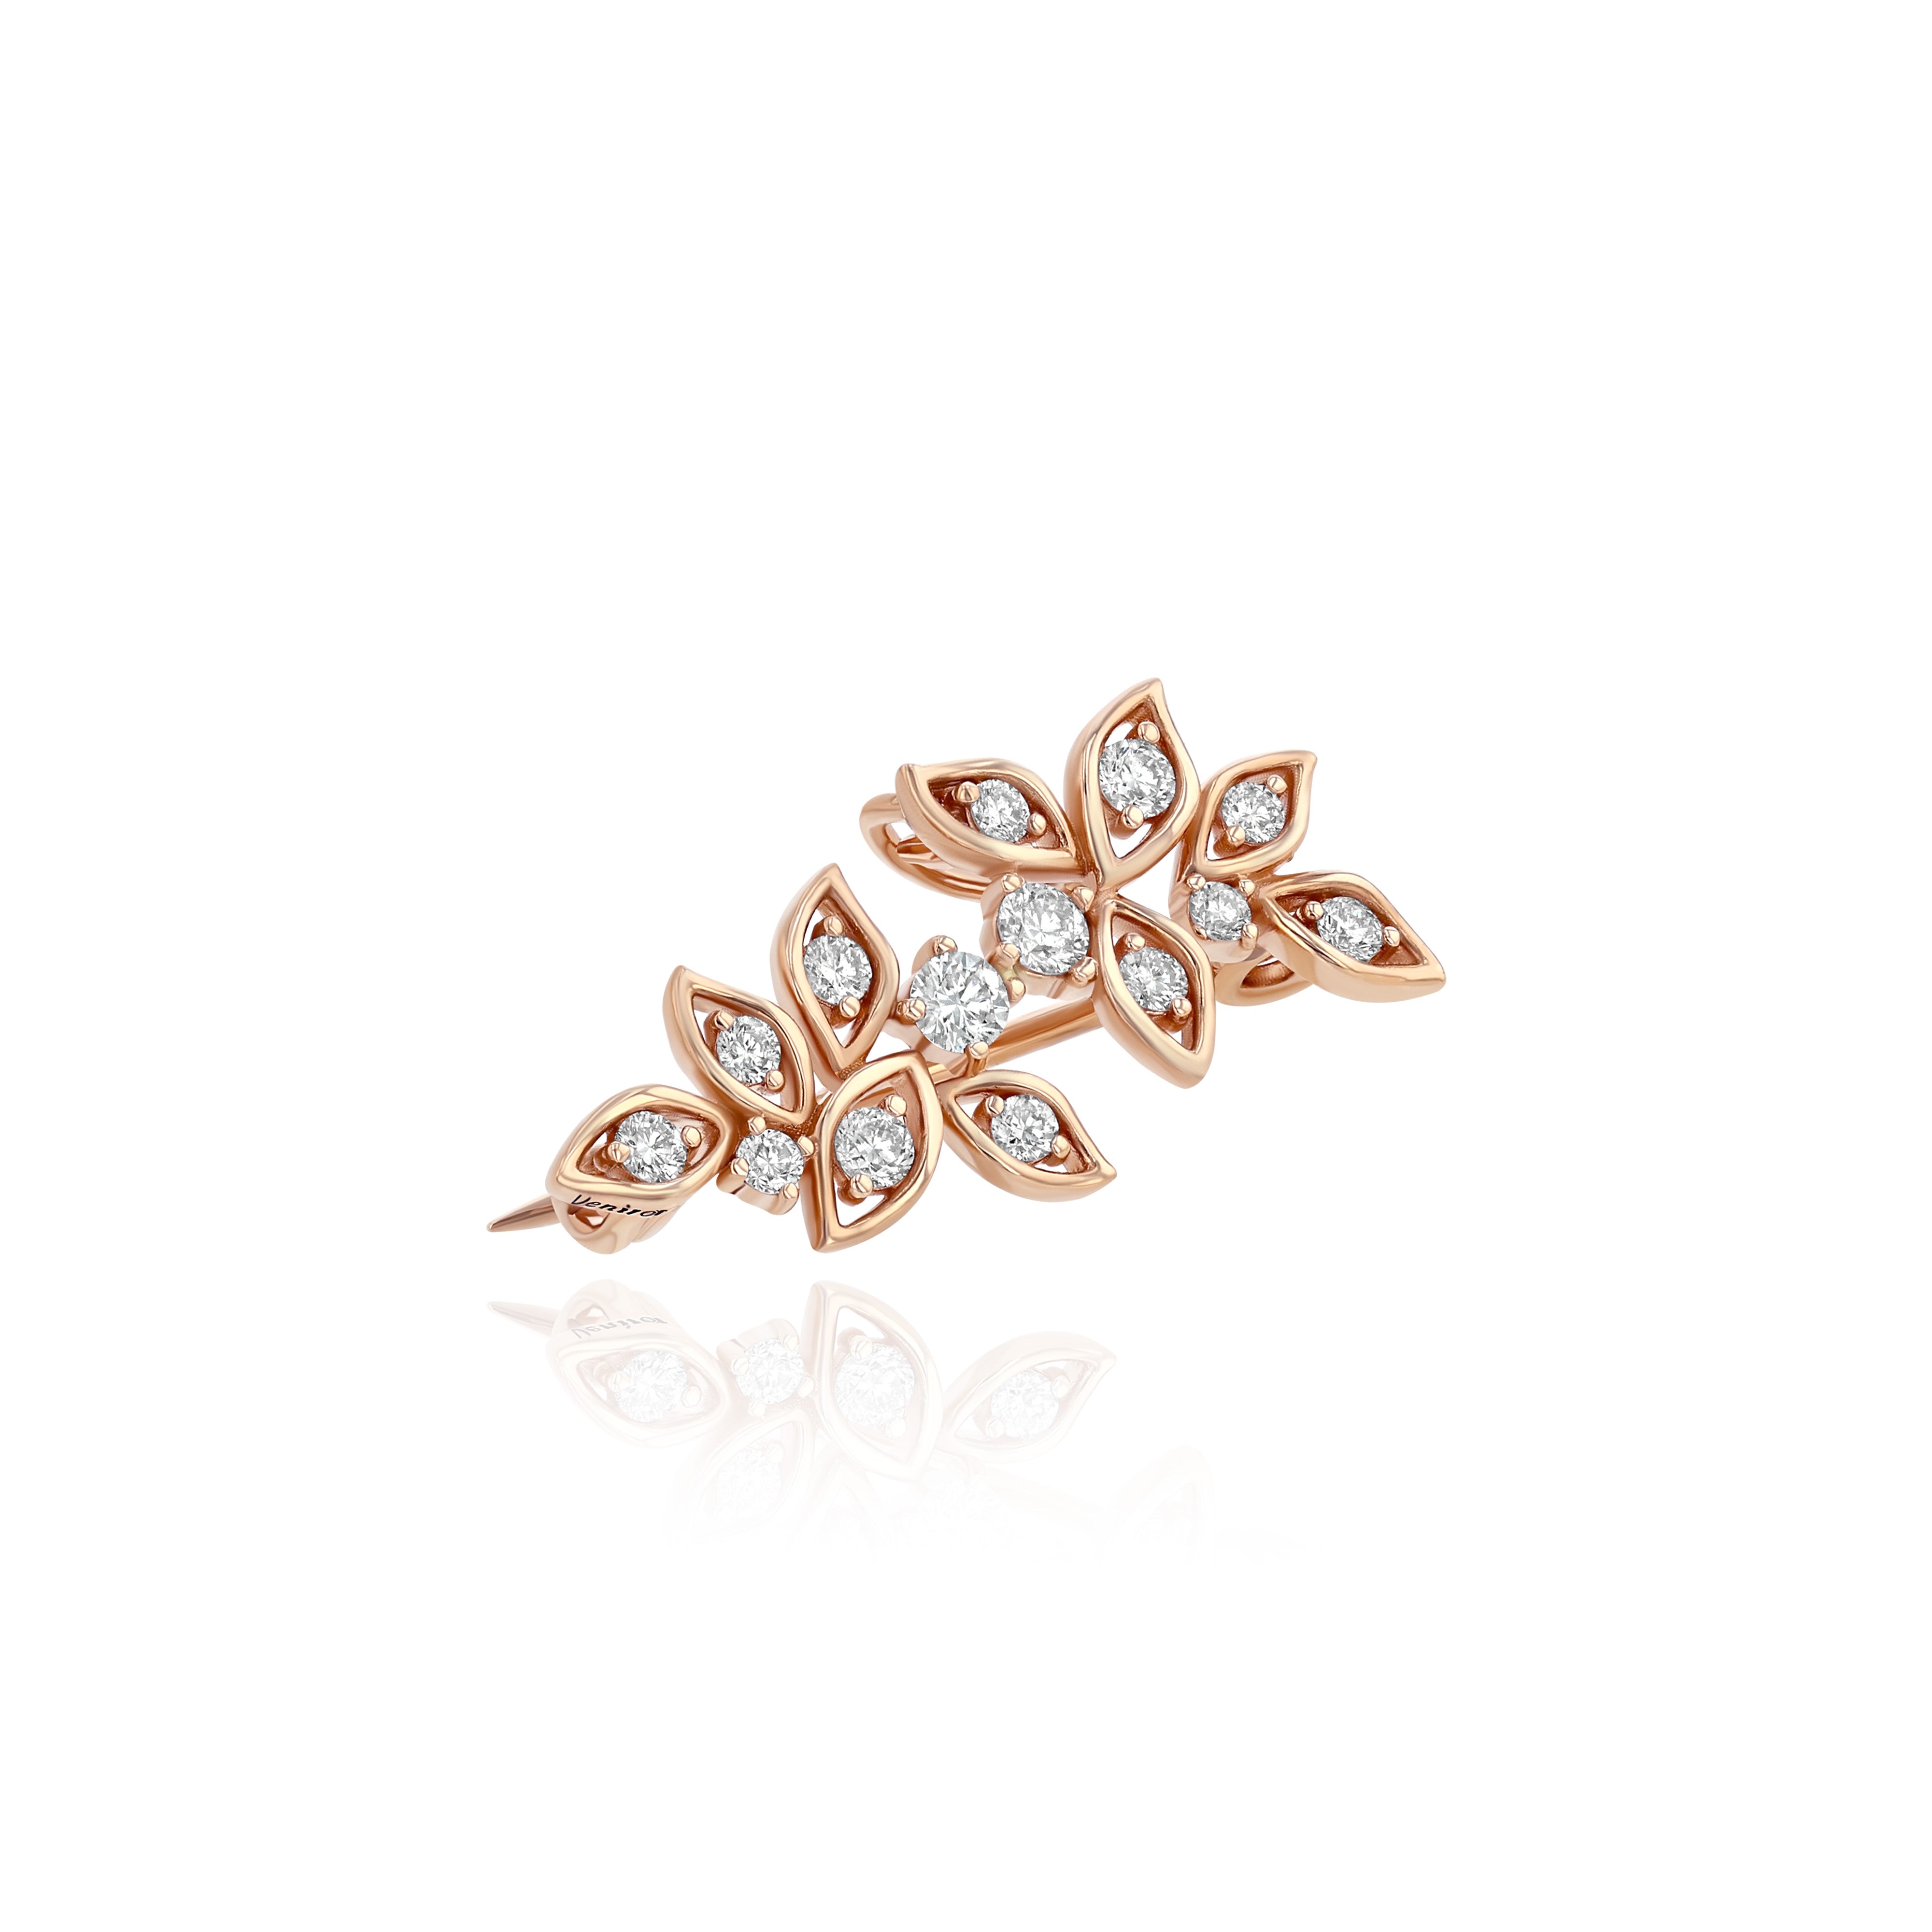 Brooch with Rose Gold petals and round Diamonds inside them, Small